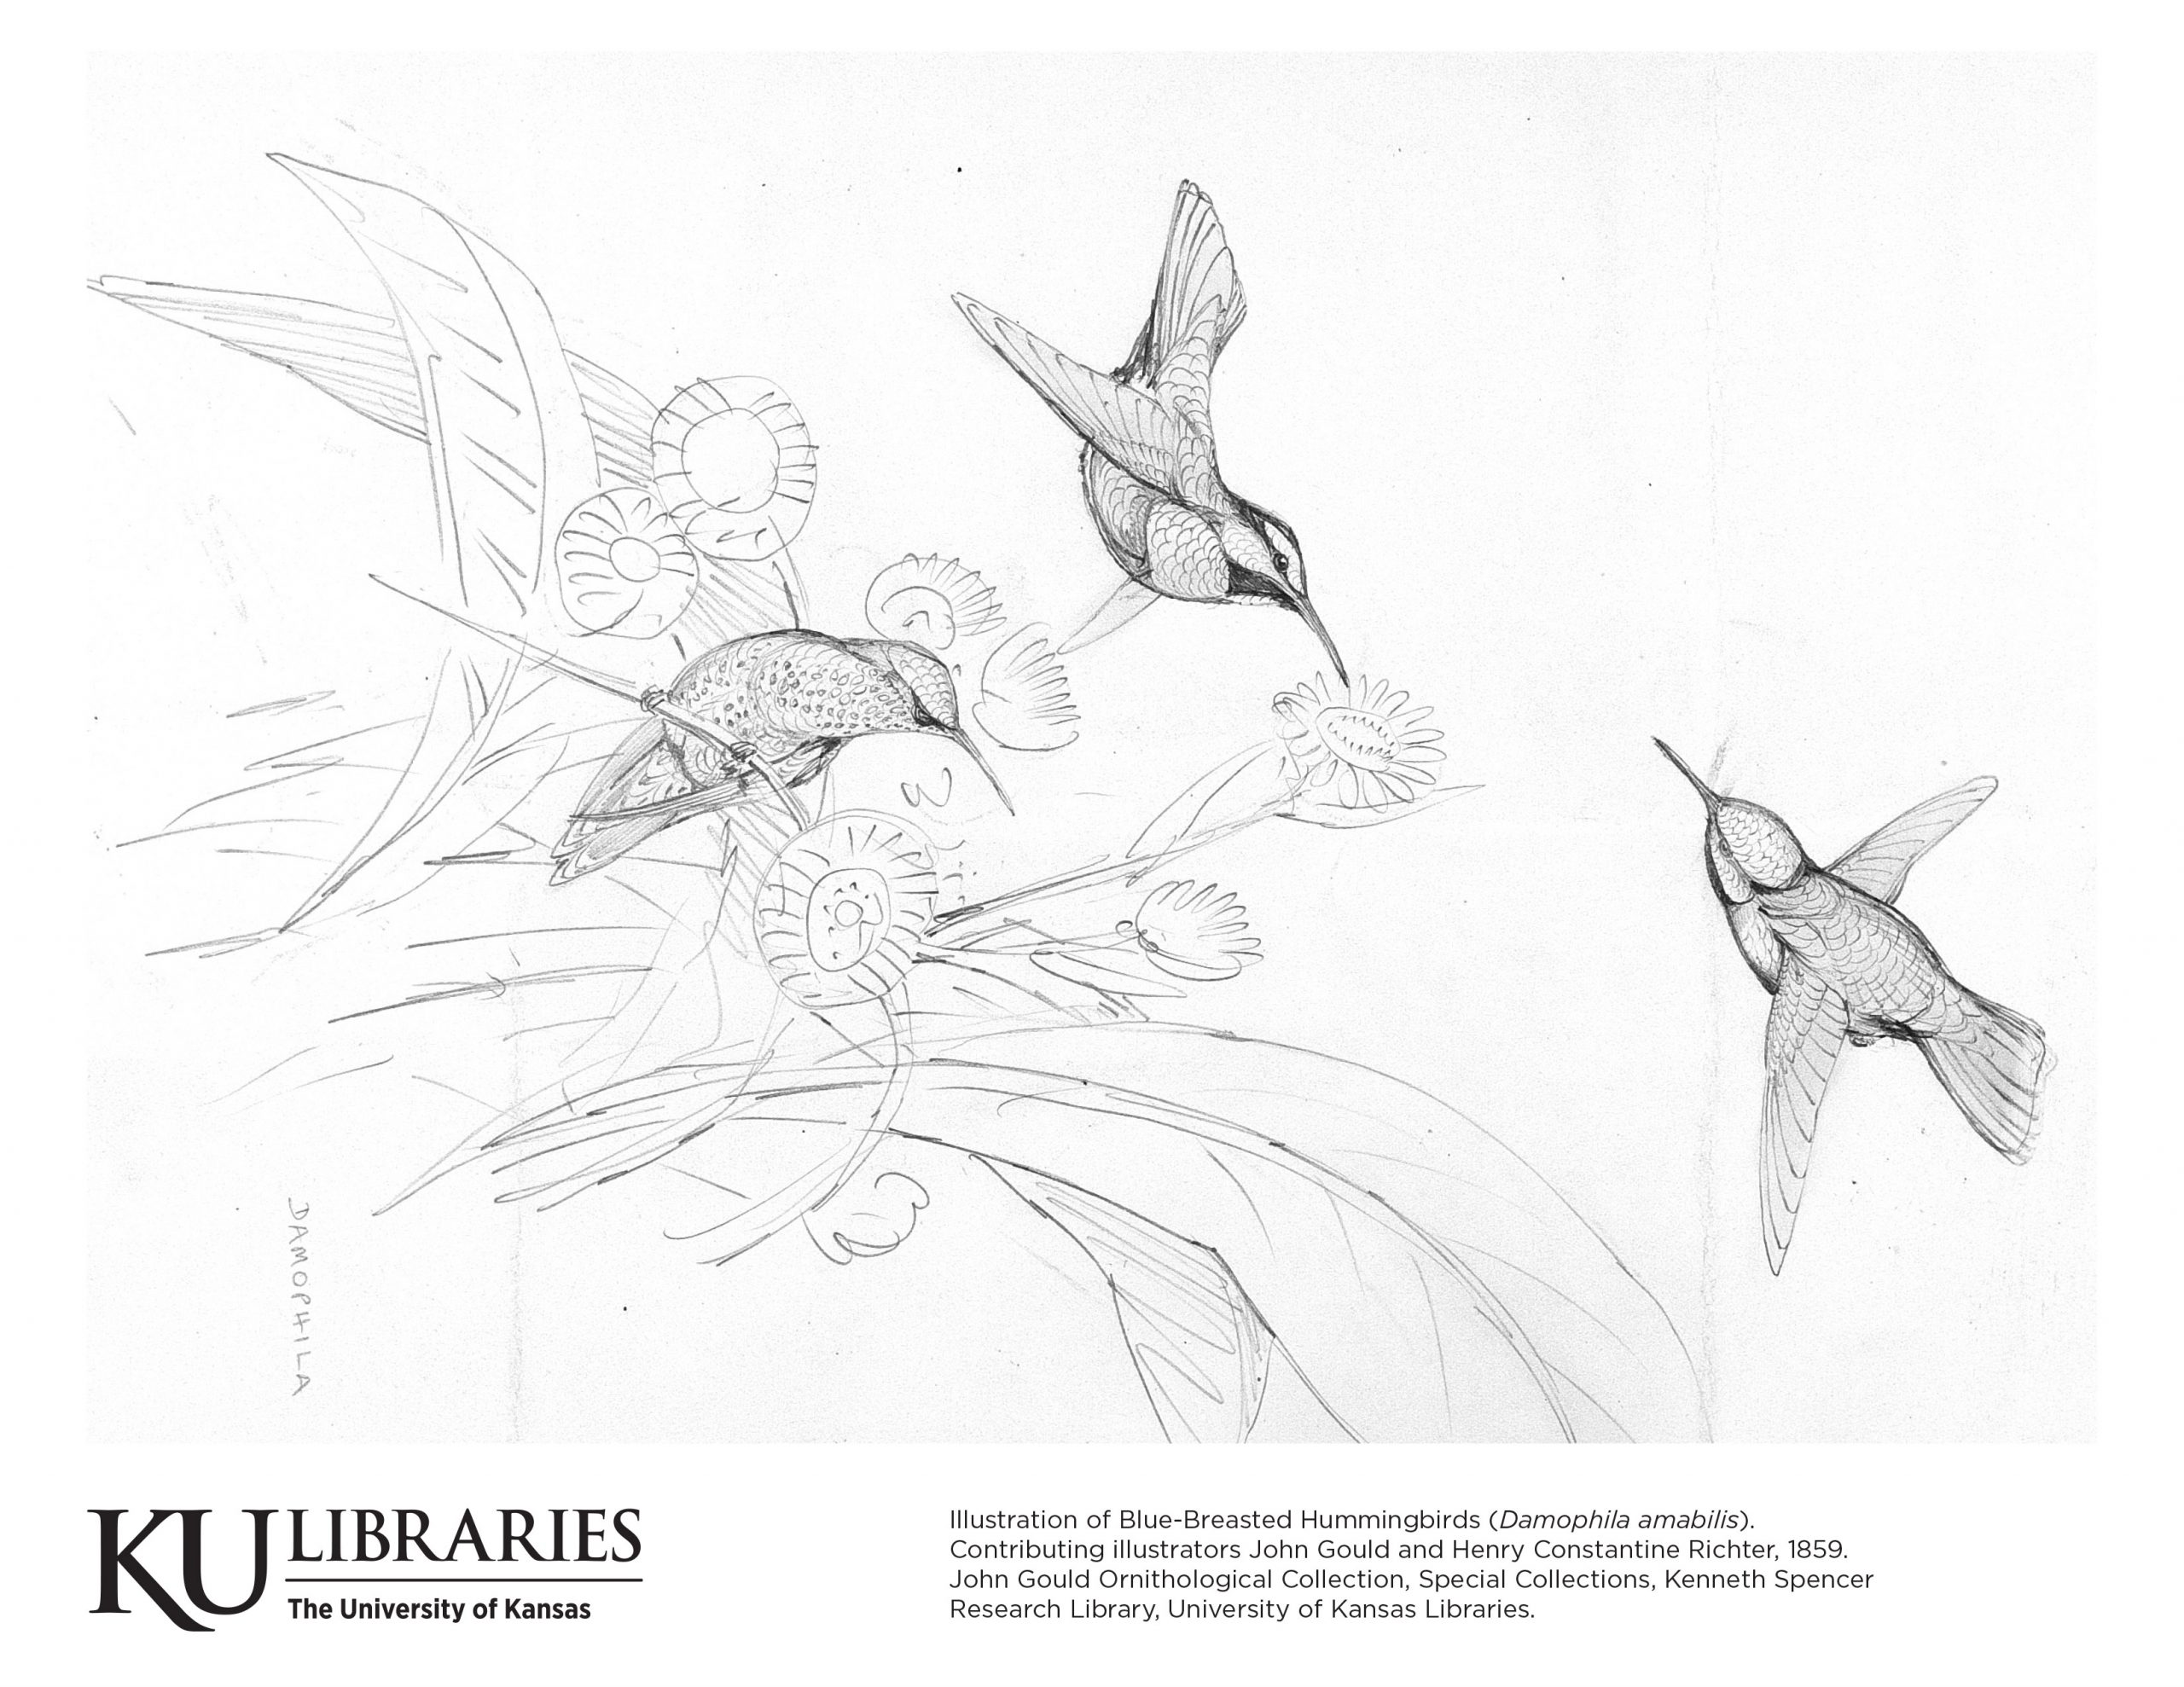 Kenneth Spencer Research Library Blog » Bird drawings picture